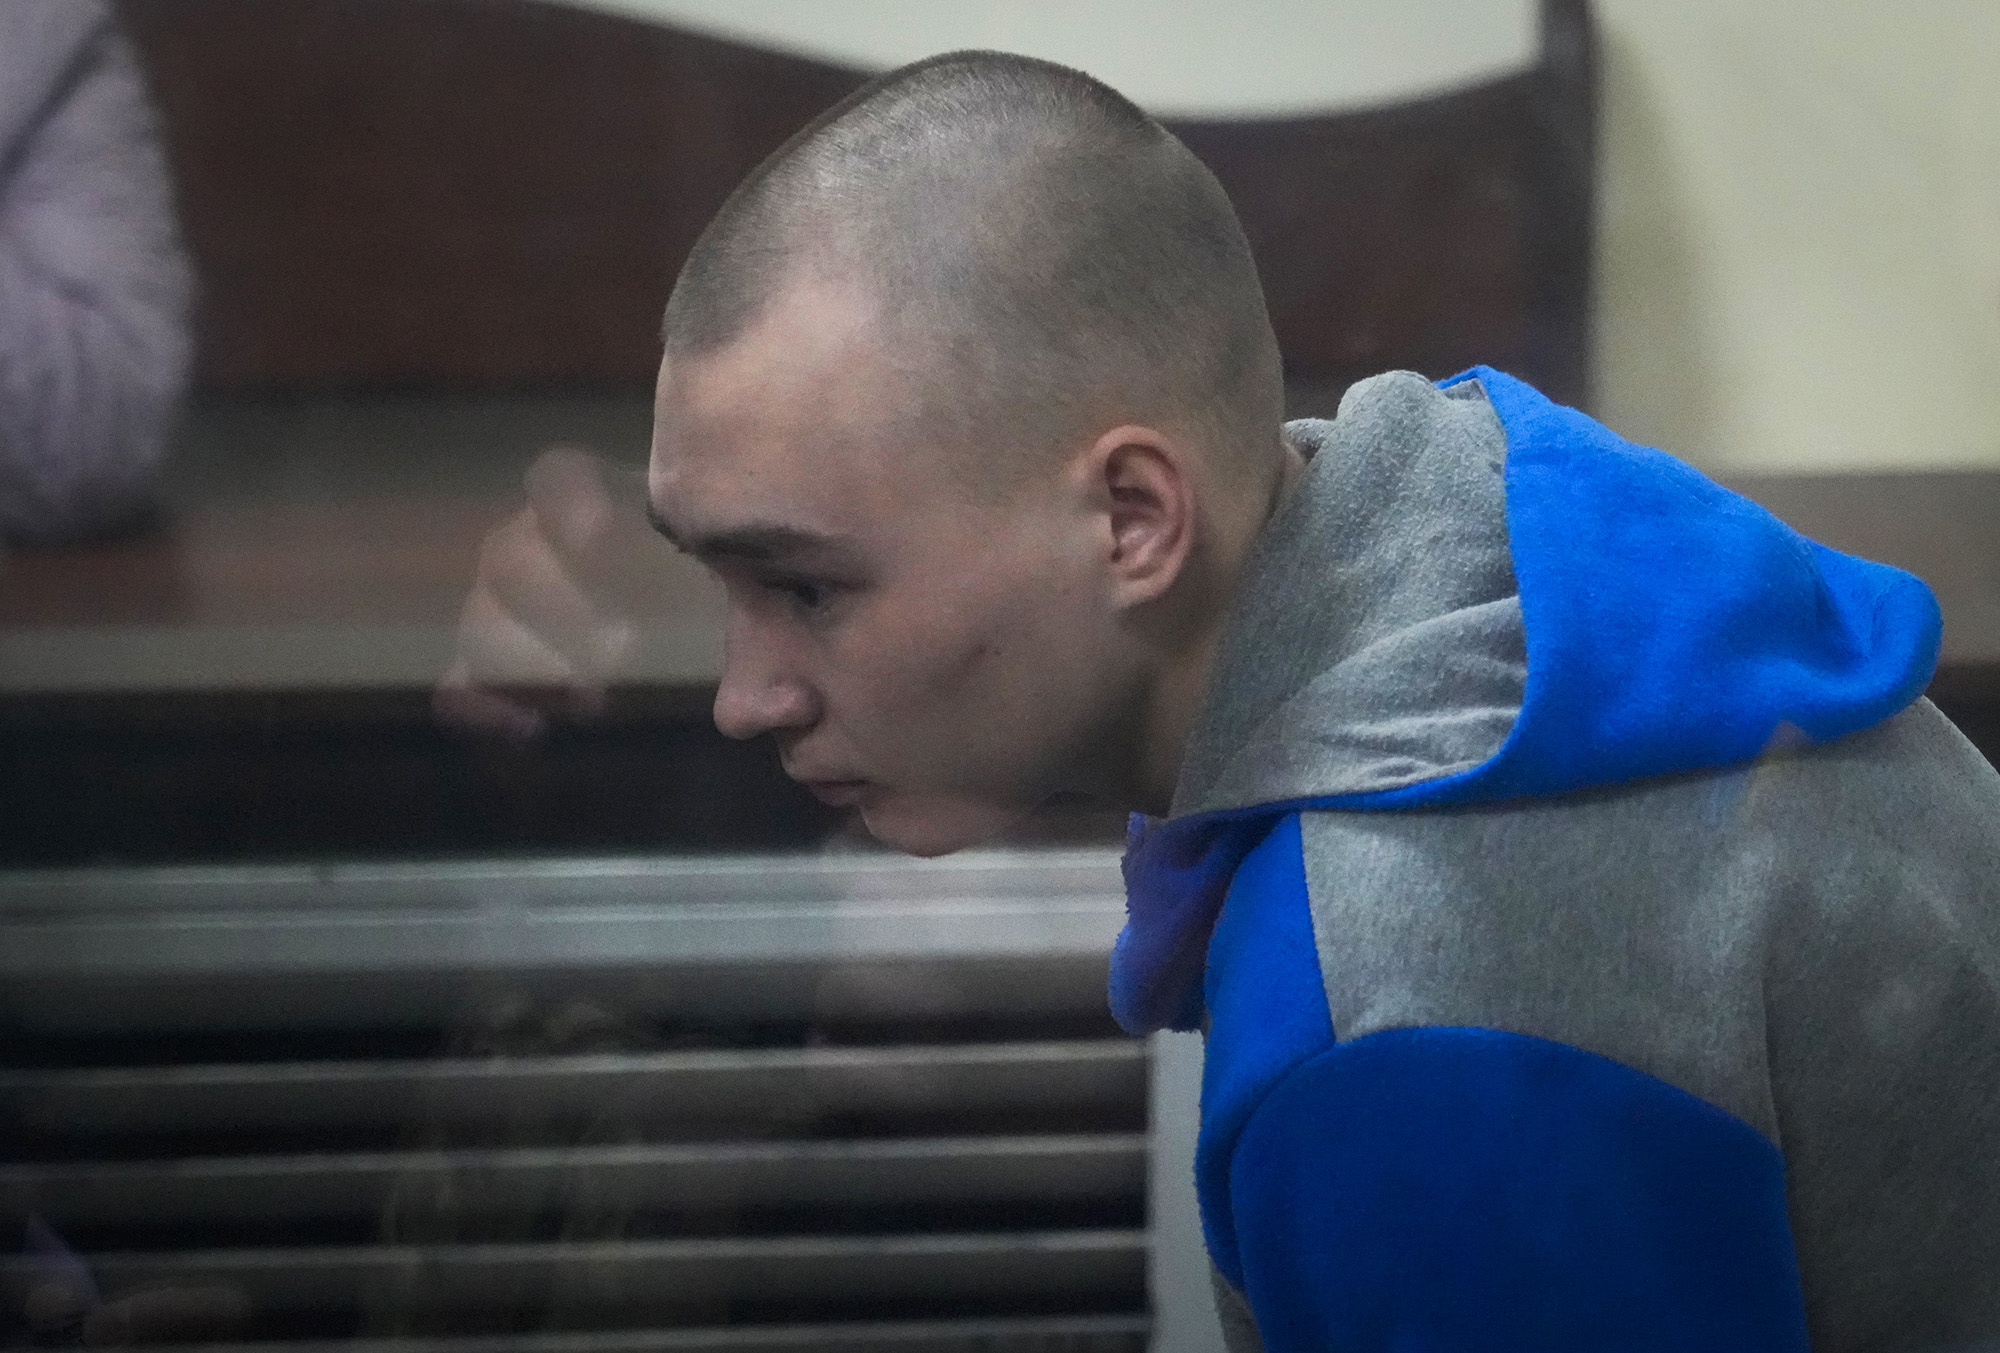 Russian army Sergeant Vadim Shishimarin, 21, is seen behind a glass during a court hearing in Kyiv, Ukraine, on May 18.